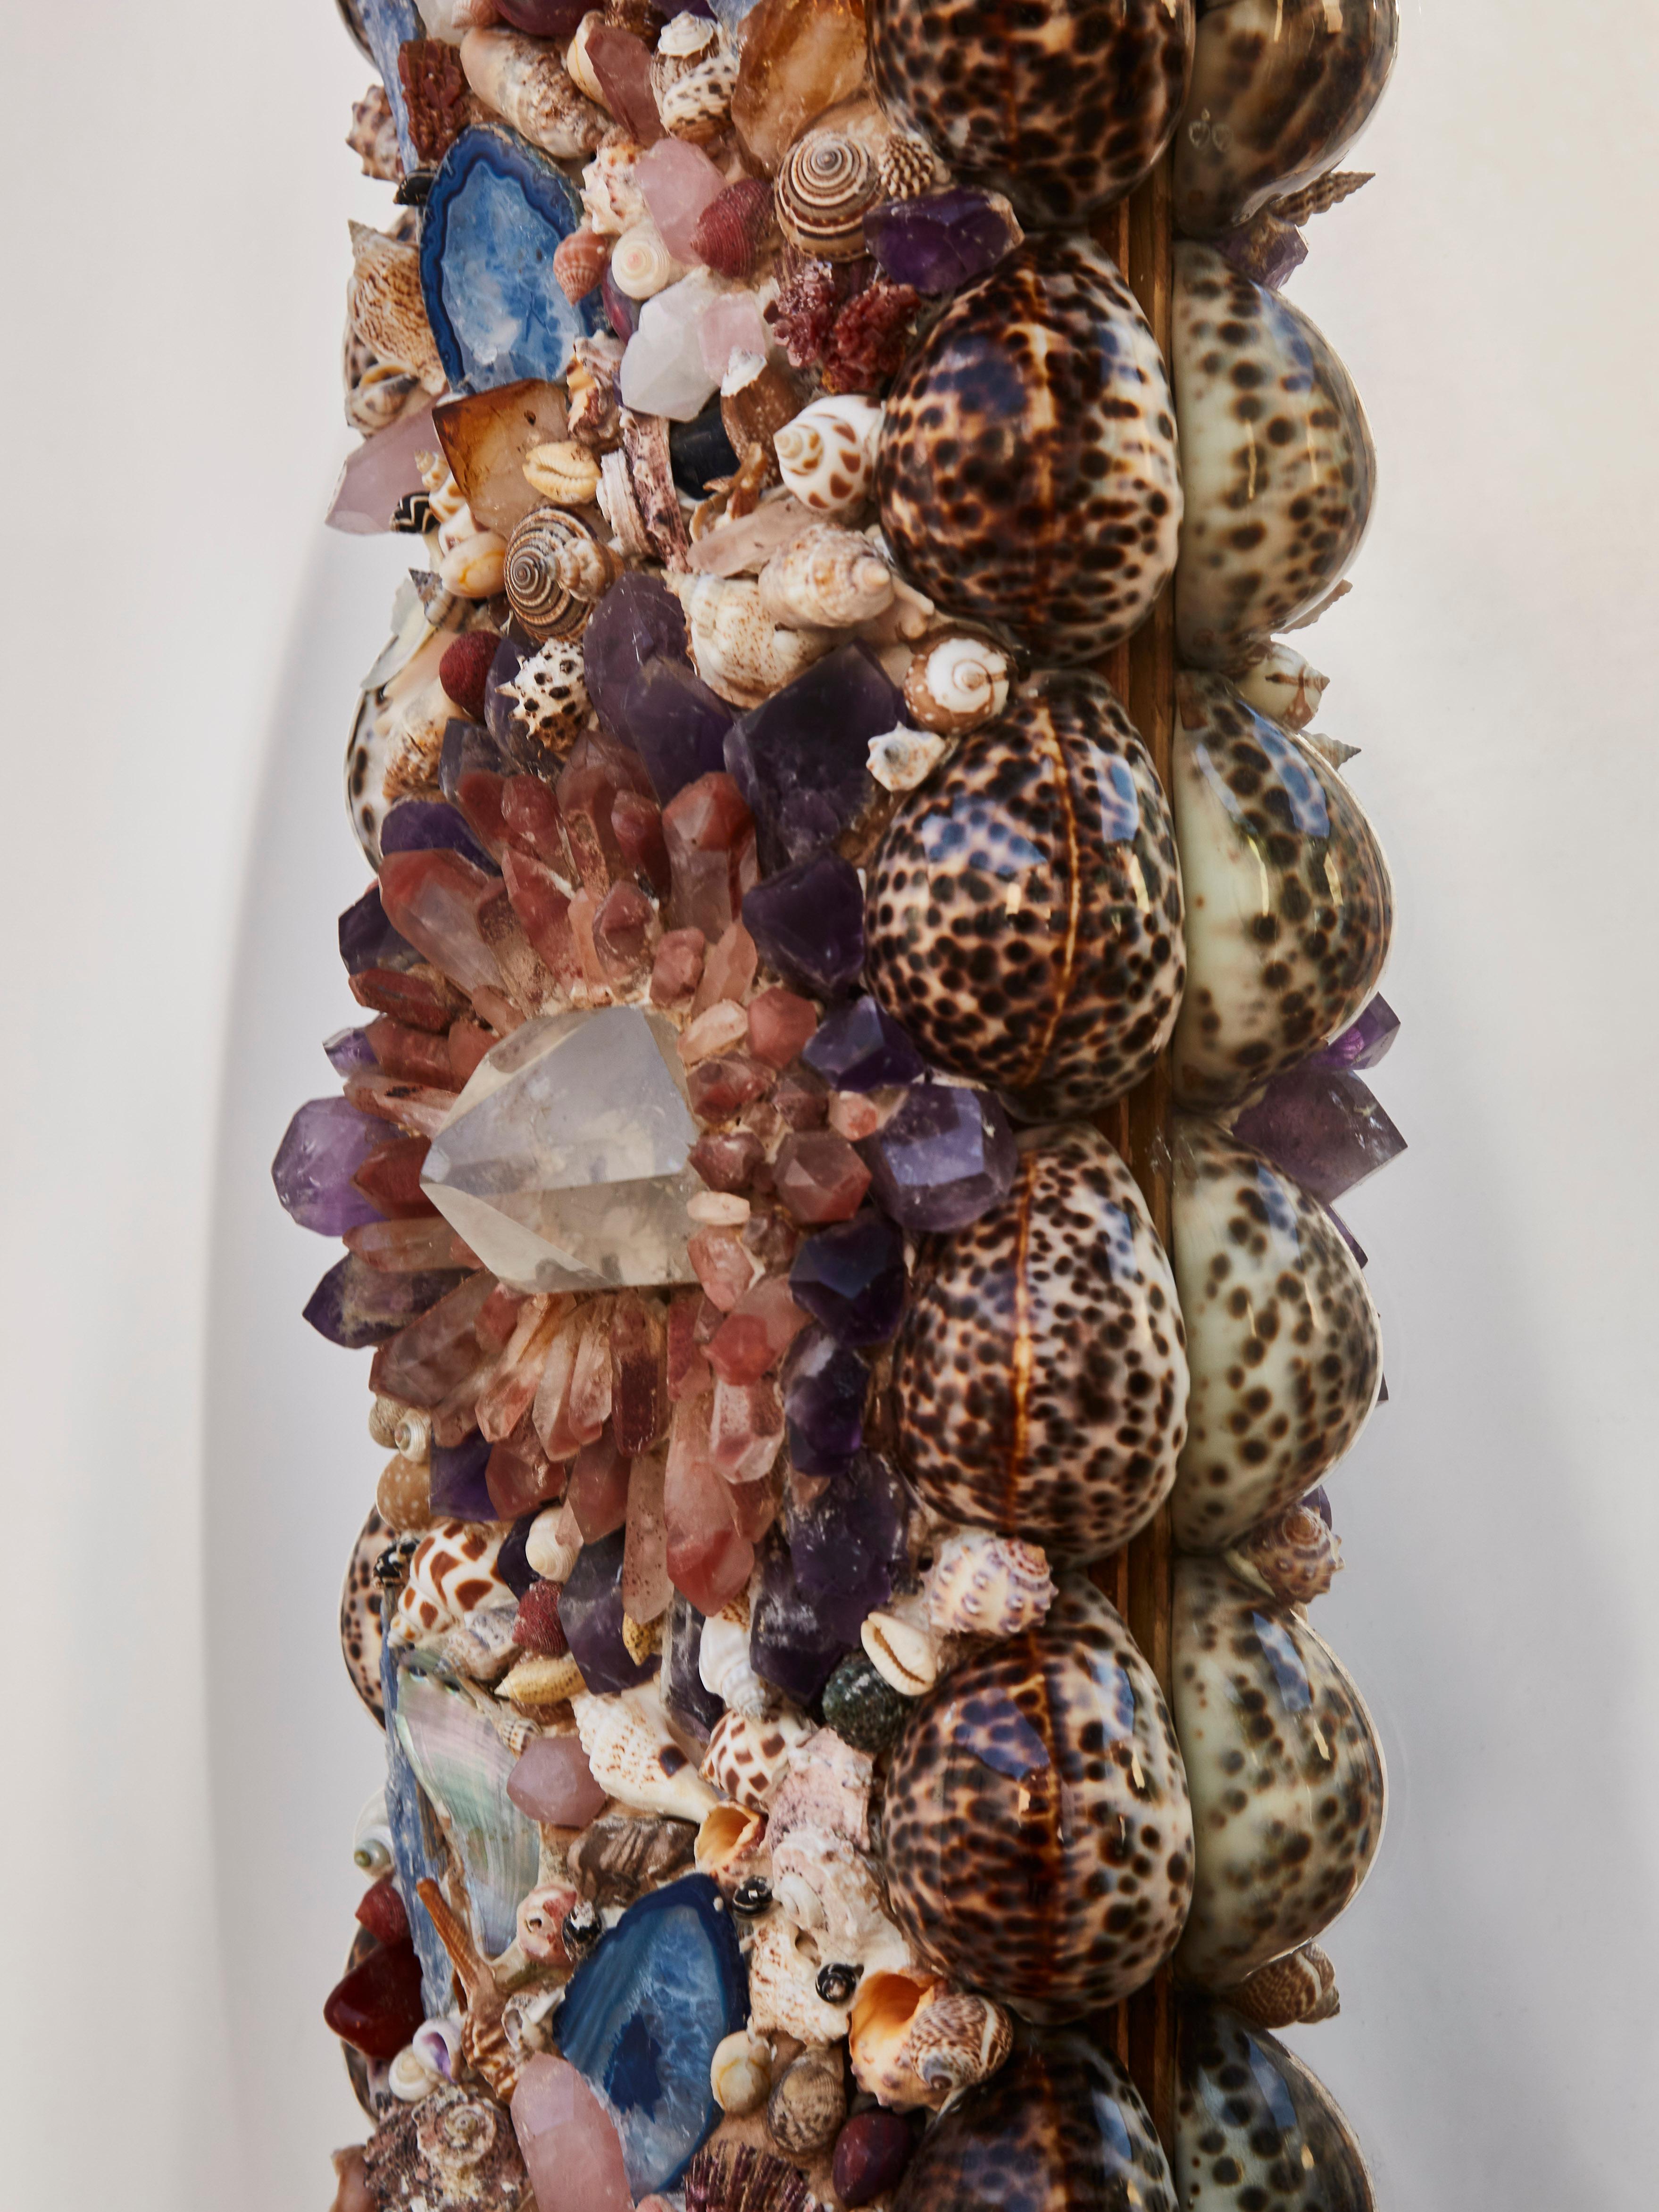 Unique mirror made of seashells and semi precious stones such as rock crystals and amethysts,
Italy, 1980s.